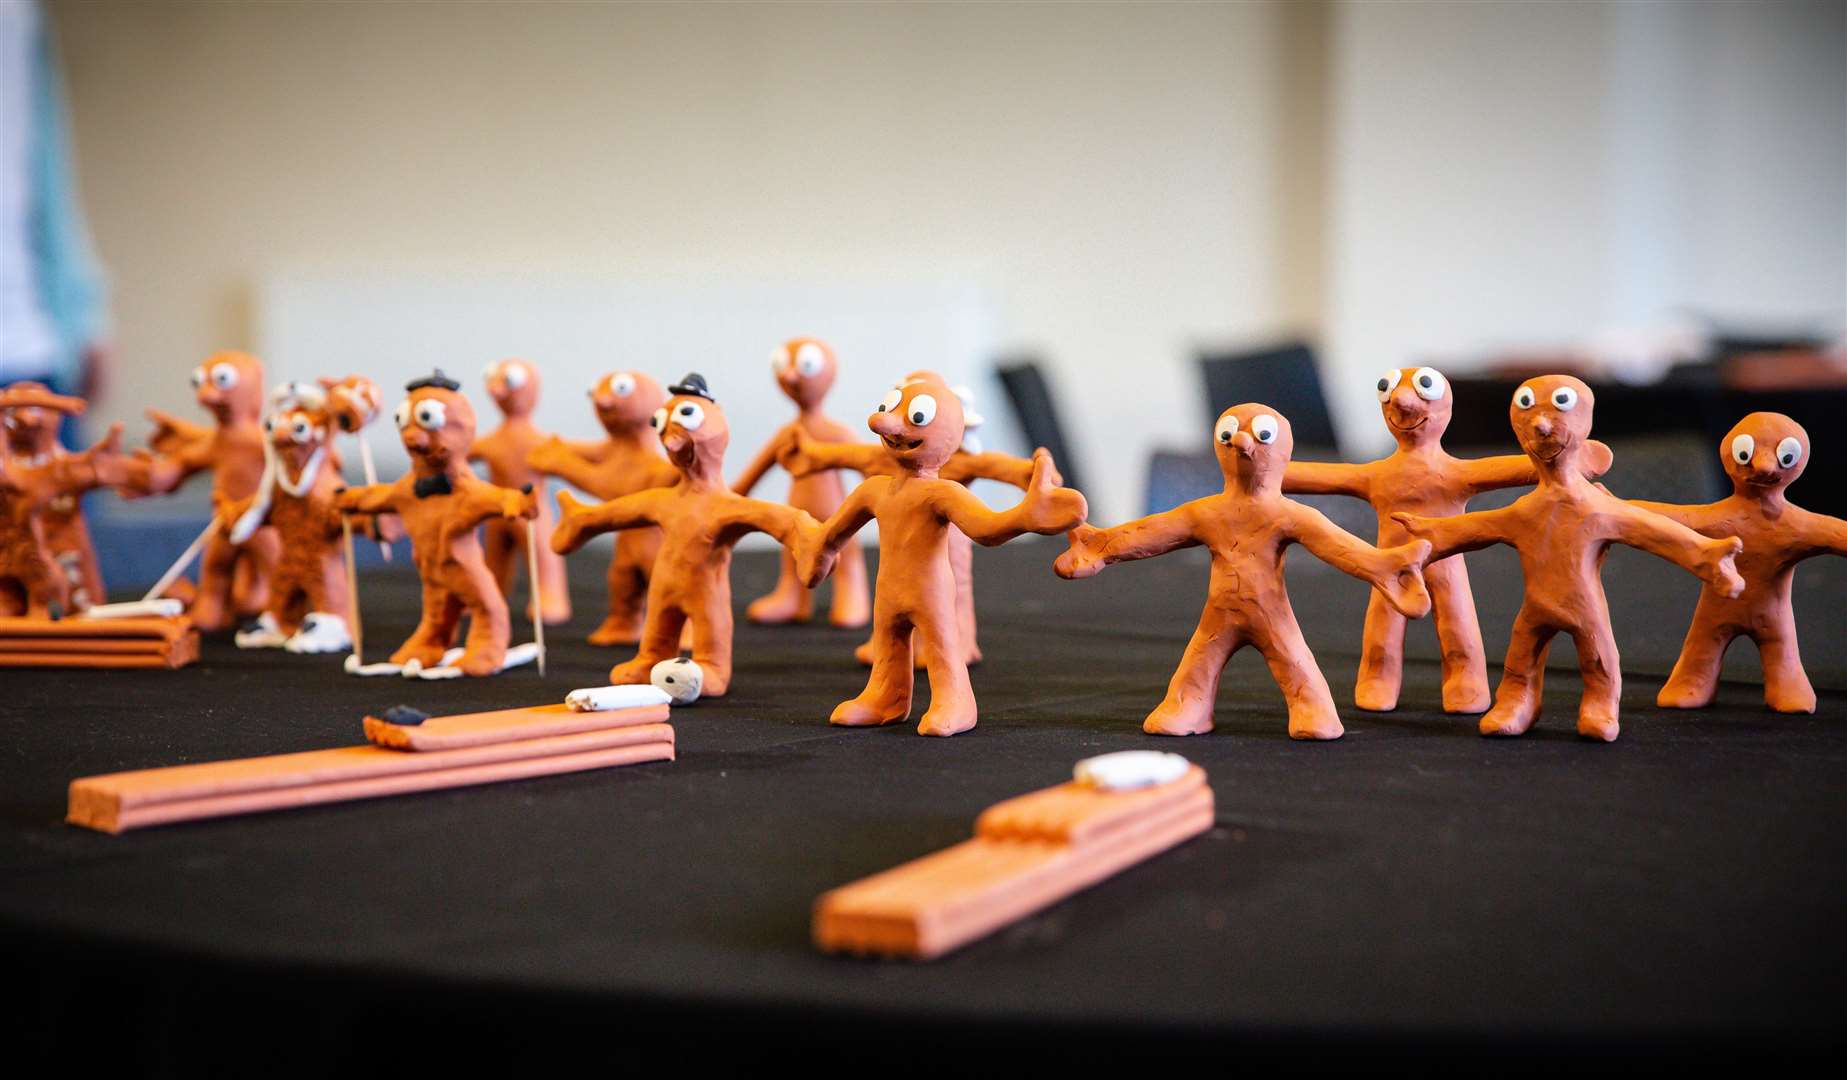 Make your own Morph at Dreamland this February half term